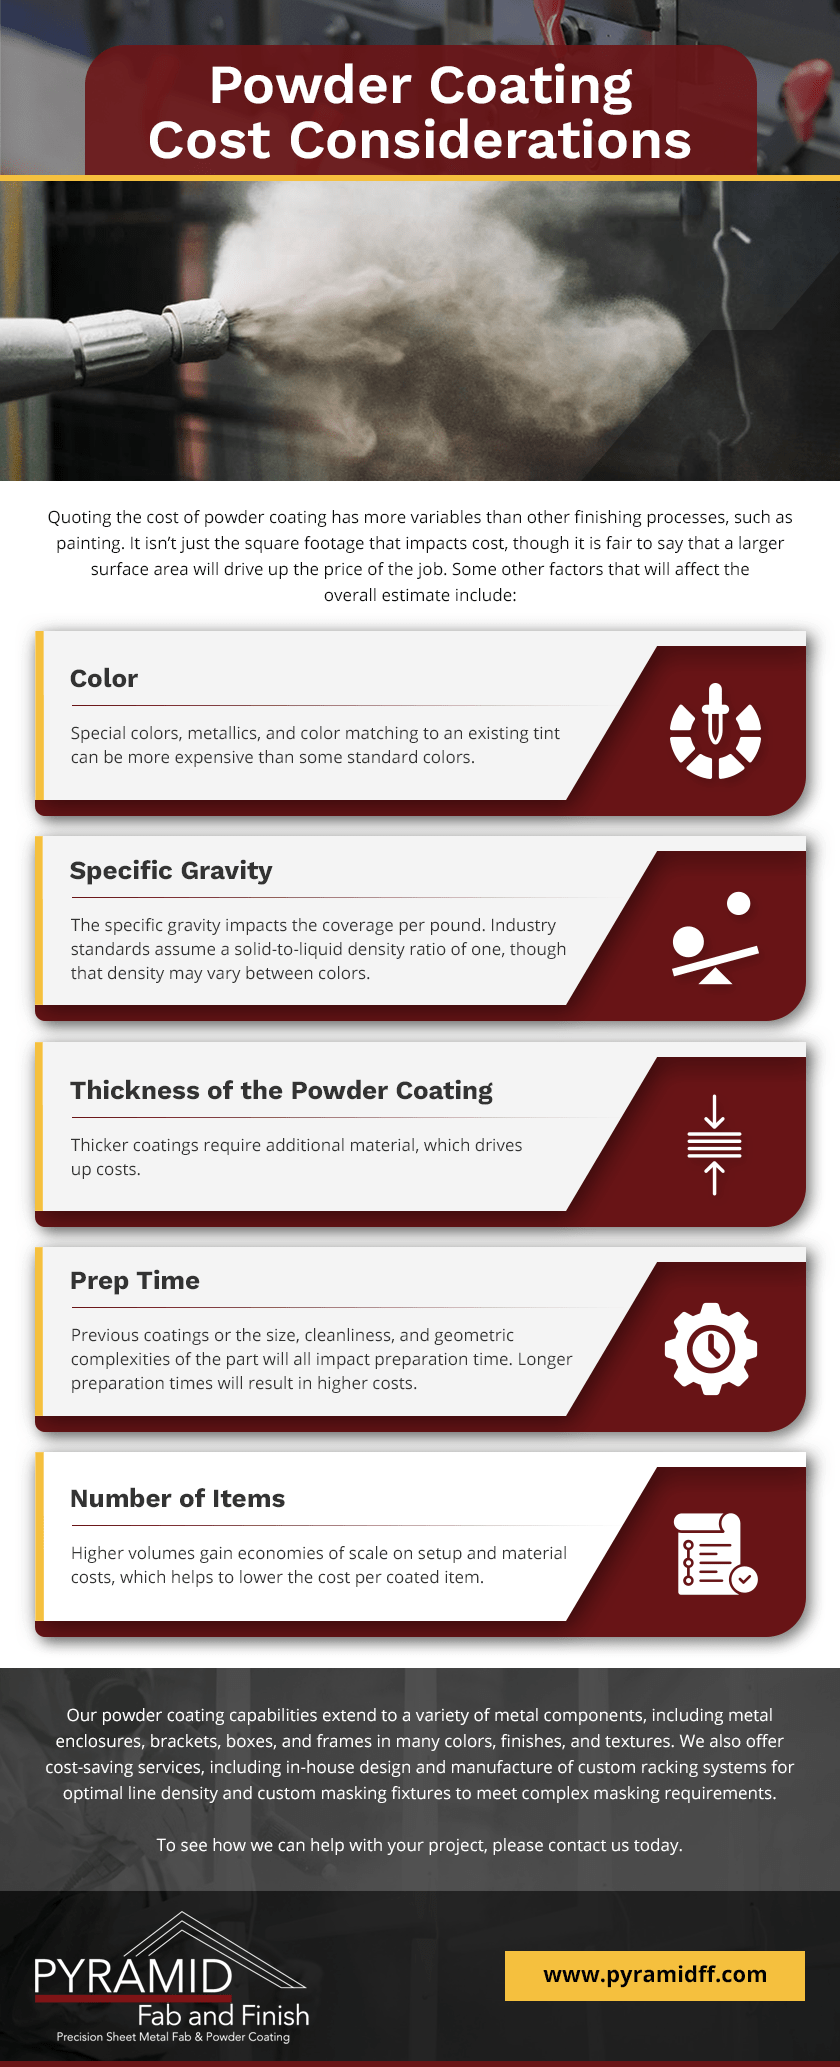 An infographic explaining the cost considerations of powder coating